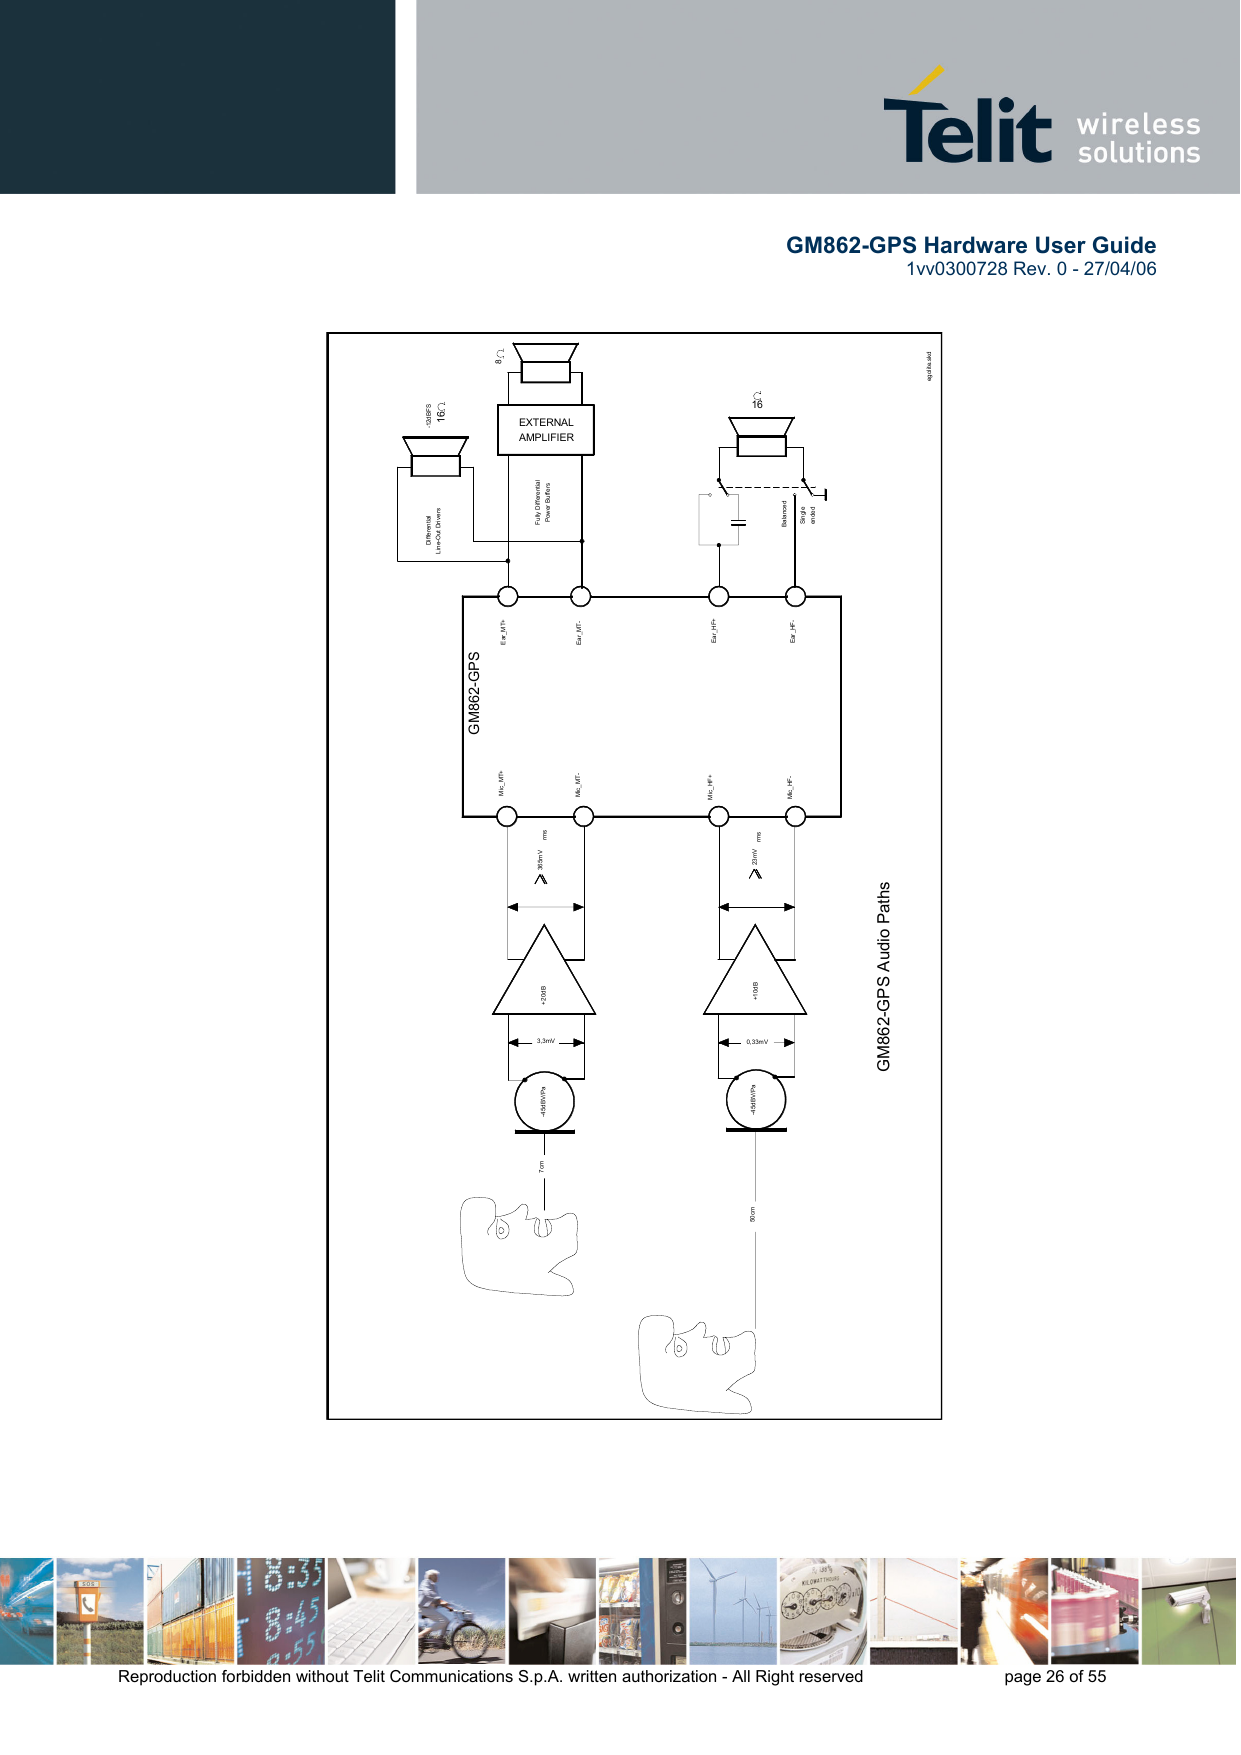        GM862-GPS Hardware User Guide   1vv0300728 Rev. 0 - 27/04/06    Reproduction forbidden without Telit Communications S.p.A. written authorization - All Right reserved    page 26 of 55     Ear_MT- Ear_MT+ +20dB 365mV rms Mic_MT+ Mic_MT- 7cm GM862-GPS    Differential  Line-Out Drivers Fully Differential Power Buffers EXTERNAL AMPLIFIER -12dBFS   16 8 -45dBV/Pa 3,3mV 16+10dB -45dBV/Pa 0,33mV Mic_HF- Ear_HF- Balanced Single  ended 23mV rms Mic_HF+ Ear_HF+ 50cm GM862-GPS Audio Paths egolite.skd  